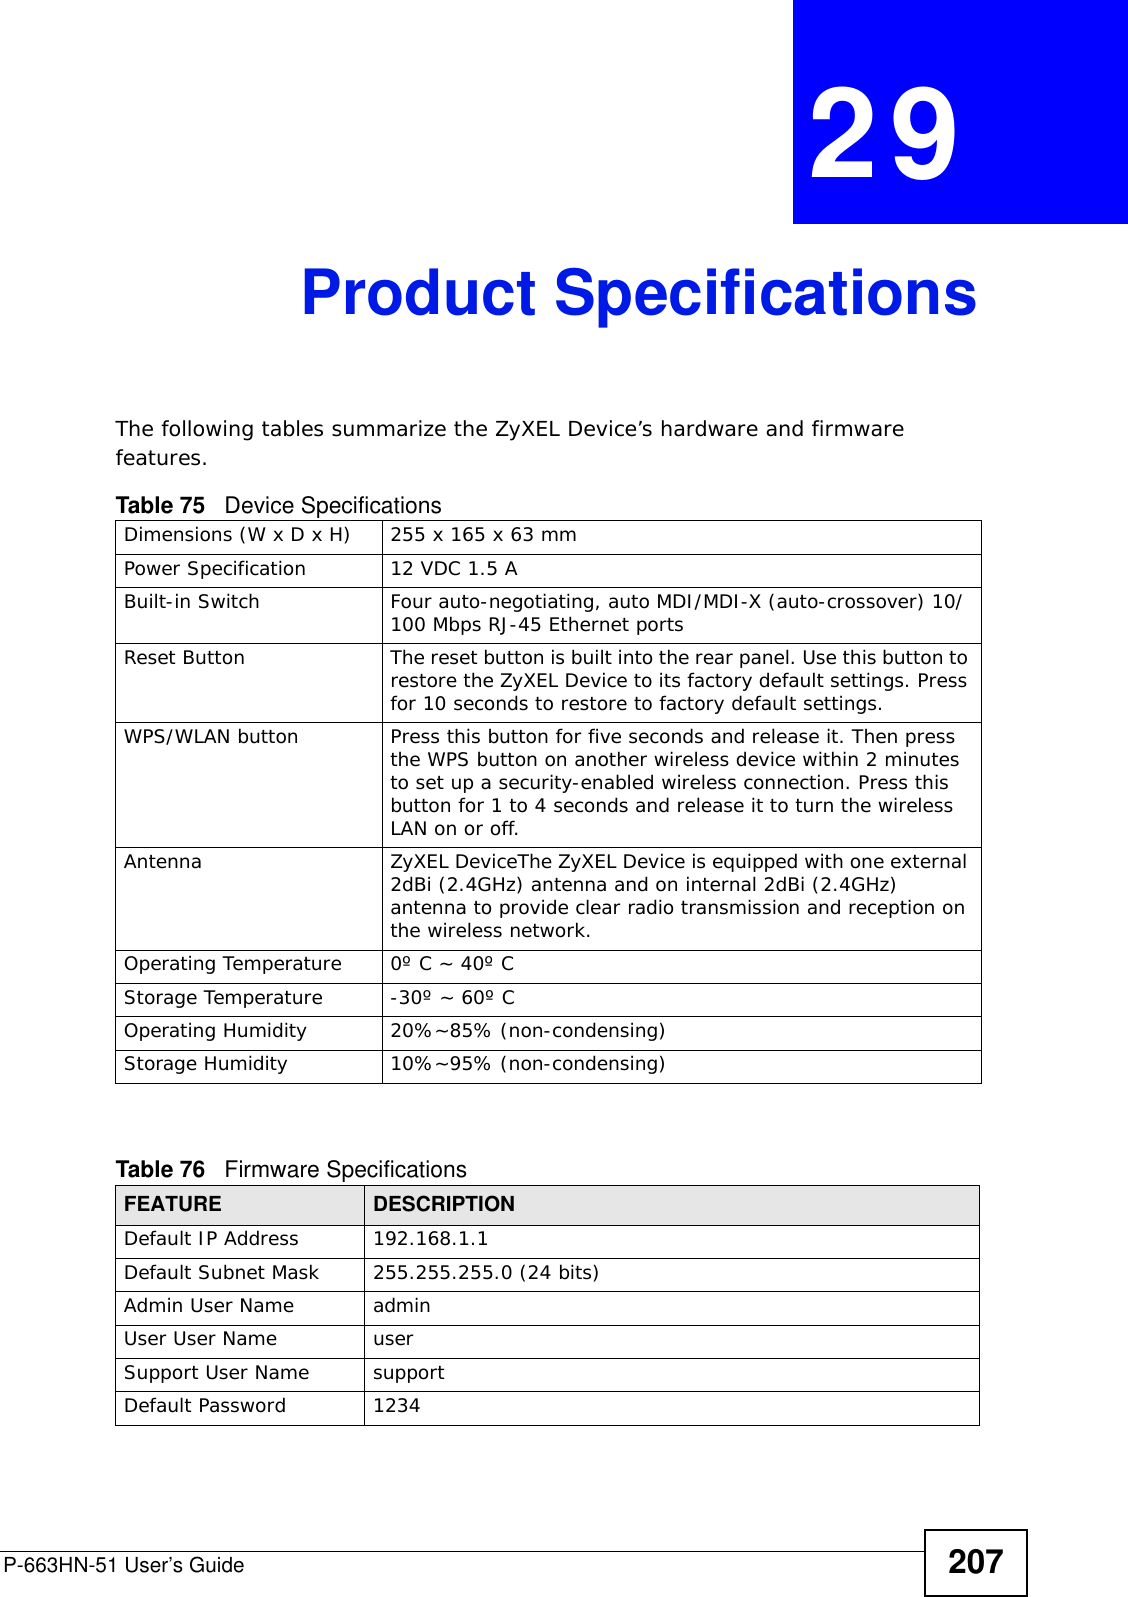 P-663HN-51 User’s Guide 207CHAPTER  29 Product SpecificationsThe following tables summarize the ZyXEL Device’s hardware and firmware features.             Table 75   Device SpecificationsDimensions (W x D x H)  255 x 165 x 63 mmPower Specification 12 VDC 1.5 ABuilt-in Switch Four auto-negotiating, auto MDI/MDI-X (auto-crossover) 10/100 Mbps RJ-45 Ethernet portsReset Button The reset button is built into the rear panel. Use this button to restore the ZyXEL Device to its factory default settings. Press for 10 seconds to restore to factory default settings.WPS/WLAN button Press this button for five seconds and release it. Then press the WPS button on another wireless device within 2 minutes to set up a security-enabled wireless connection. Press this button for 1 to 4 seconds and release it to turn the wireless LAN on or off.Antenna ZyXEL DeviceThe ZyXEL Device is equipped with one external 2dBi (2.4GHz) antenna and on internal 2dBi (2.4GHz) antenna to provide clear radio transmission and reception on the wireless network. Operating Temperature 0º C ~ 40º CStorage Temperature -30º ~ 60º COperating Humidity 20%~85% (non-condensing)Storage Humidity 10%~95% (non-condensing)Table 76   Firmware Specifications FEATURE DESCRIPTIONDefault IP Address 192.168.1.1Default Subnet Mask 255.255.255.0 (24 bits)Admin User Name  admin User User Name userSupport User Name supportDefault Password 1234